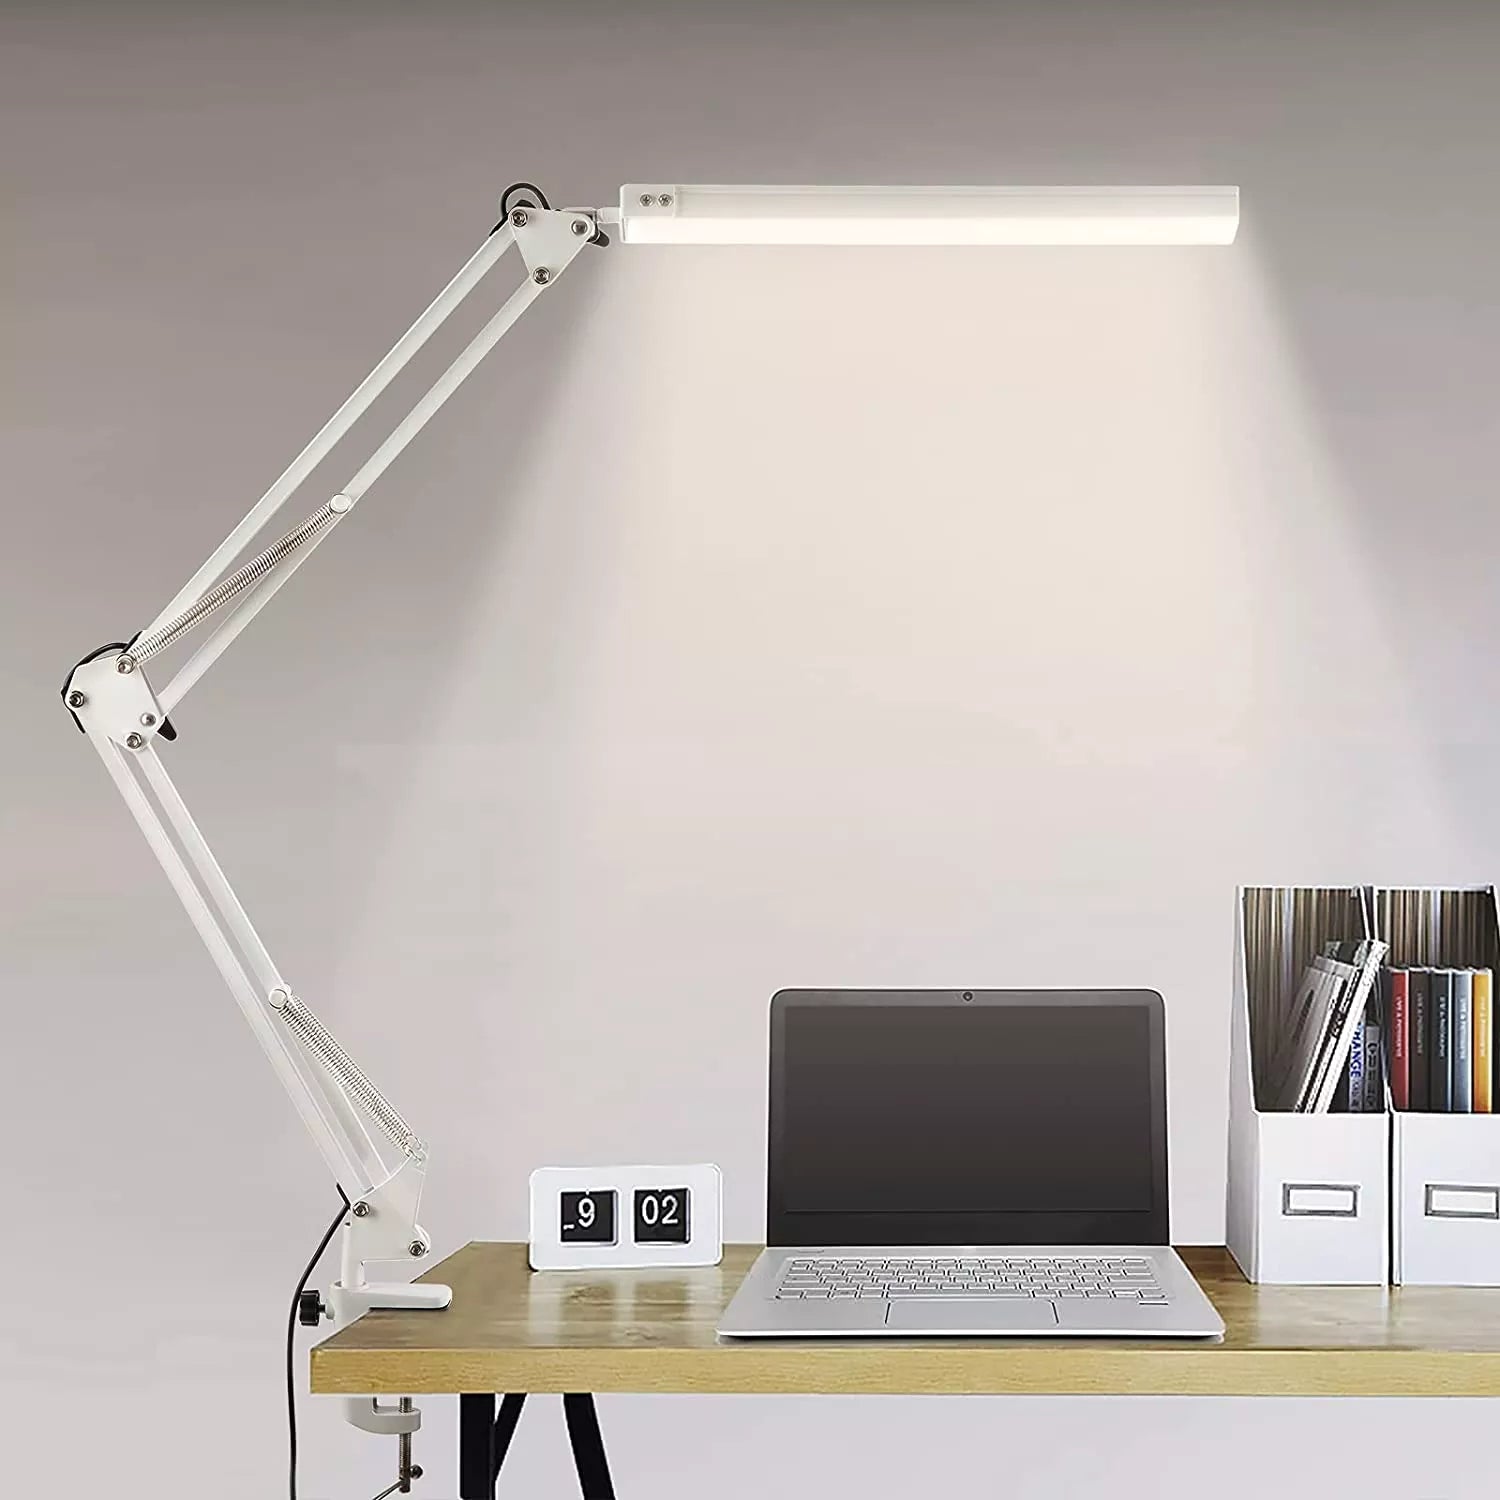 LED Desk Lamp With Clip, Desk Lamp With Eye Care, Office Light With Adjustable Brightness  3 Lighting Modes, 10 Brightness